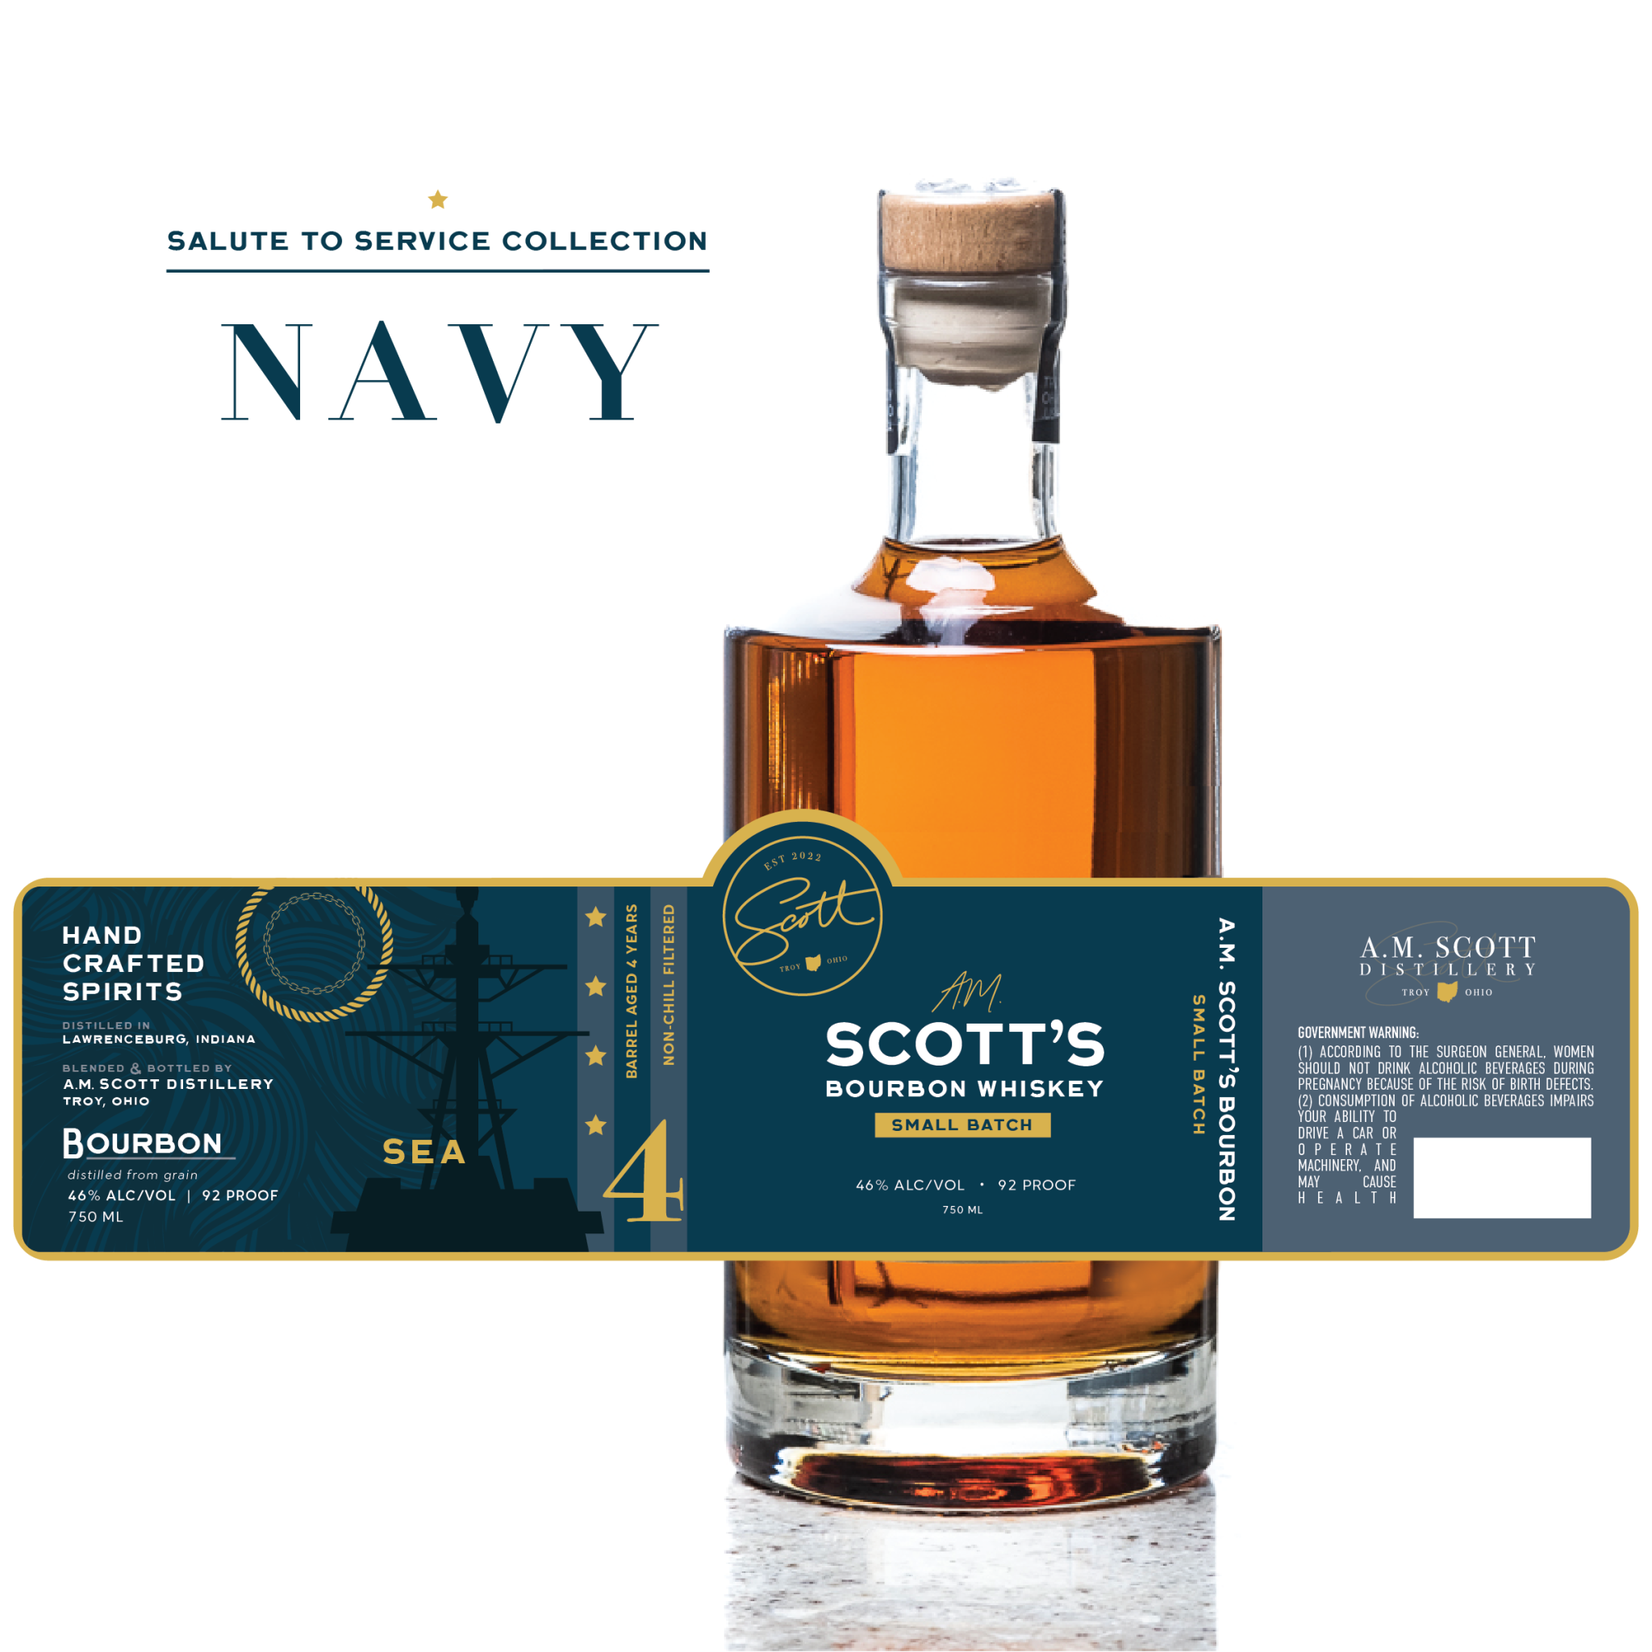 A.M. Scott's Salute to Service Collection - NAVY